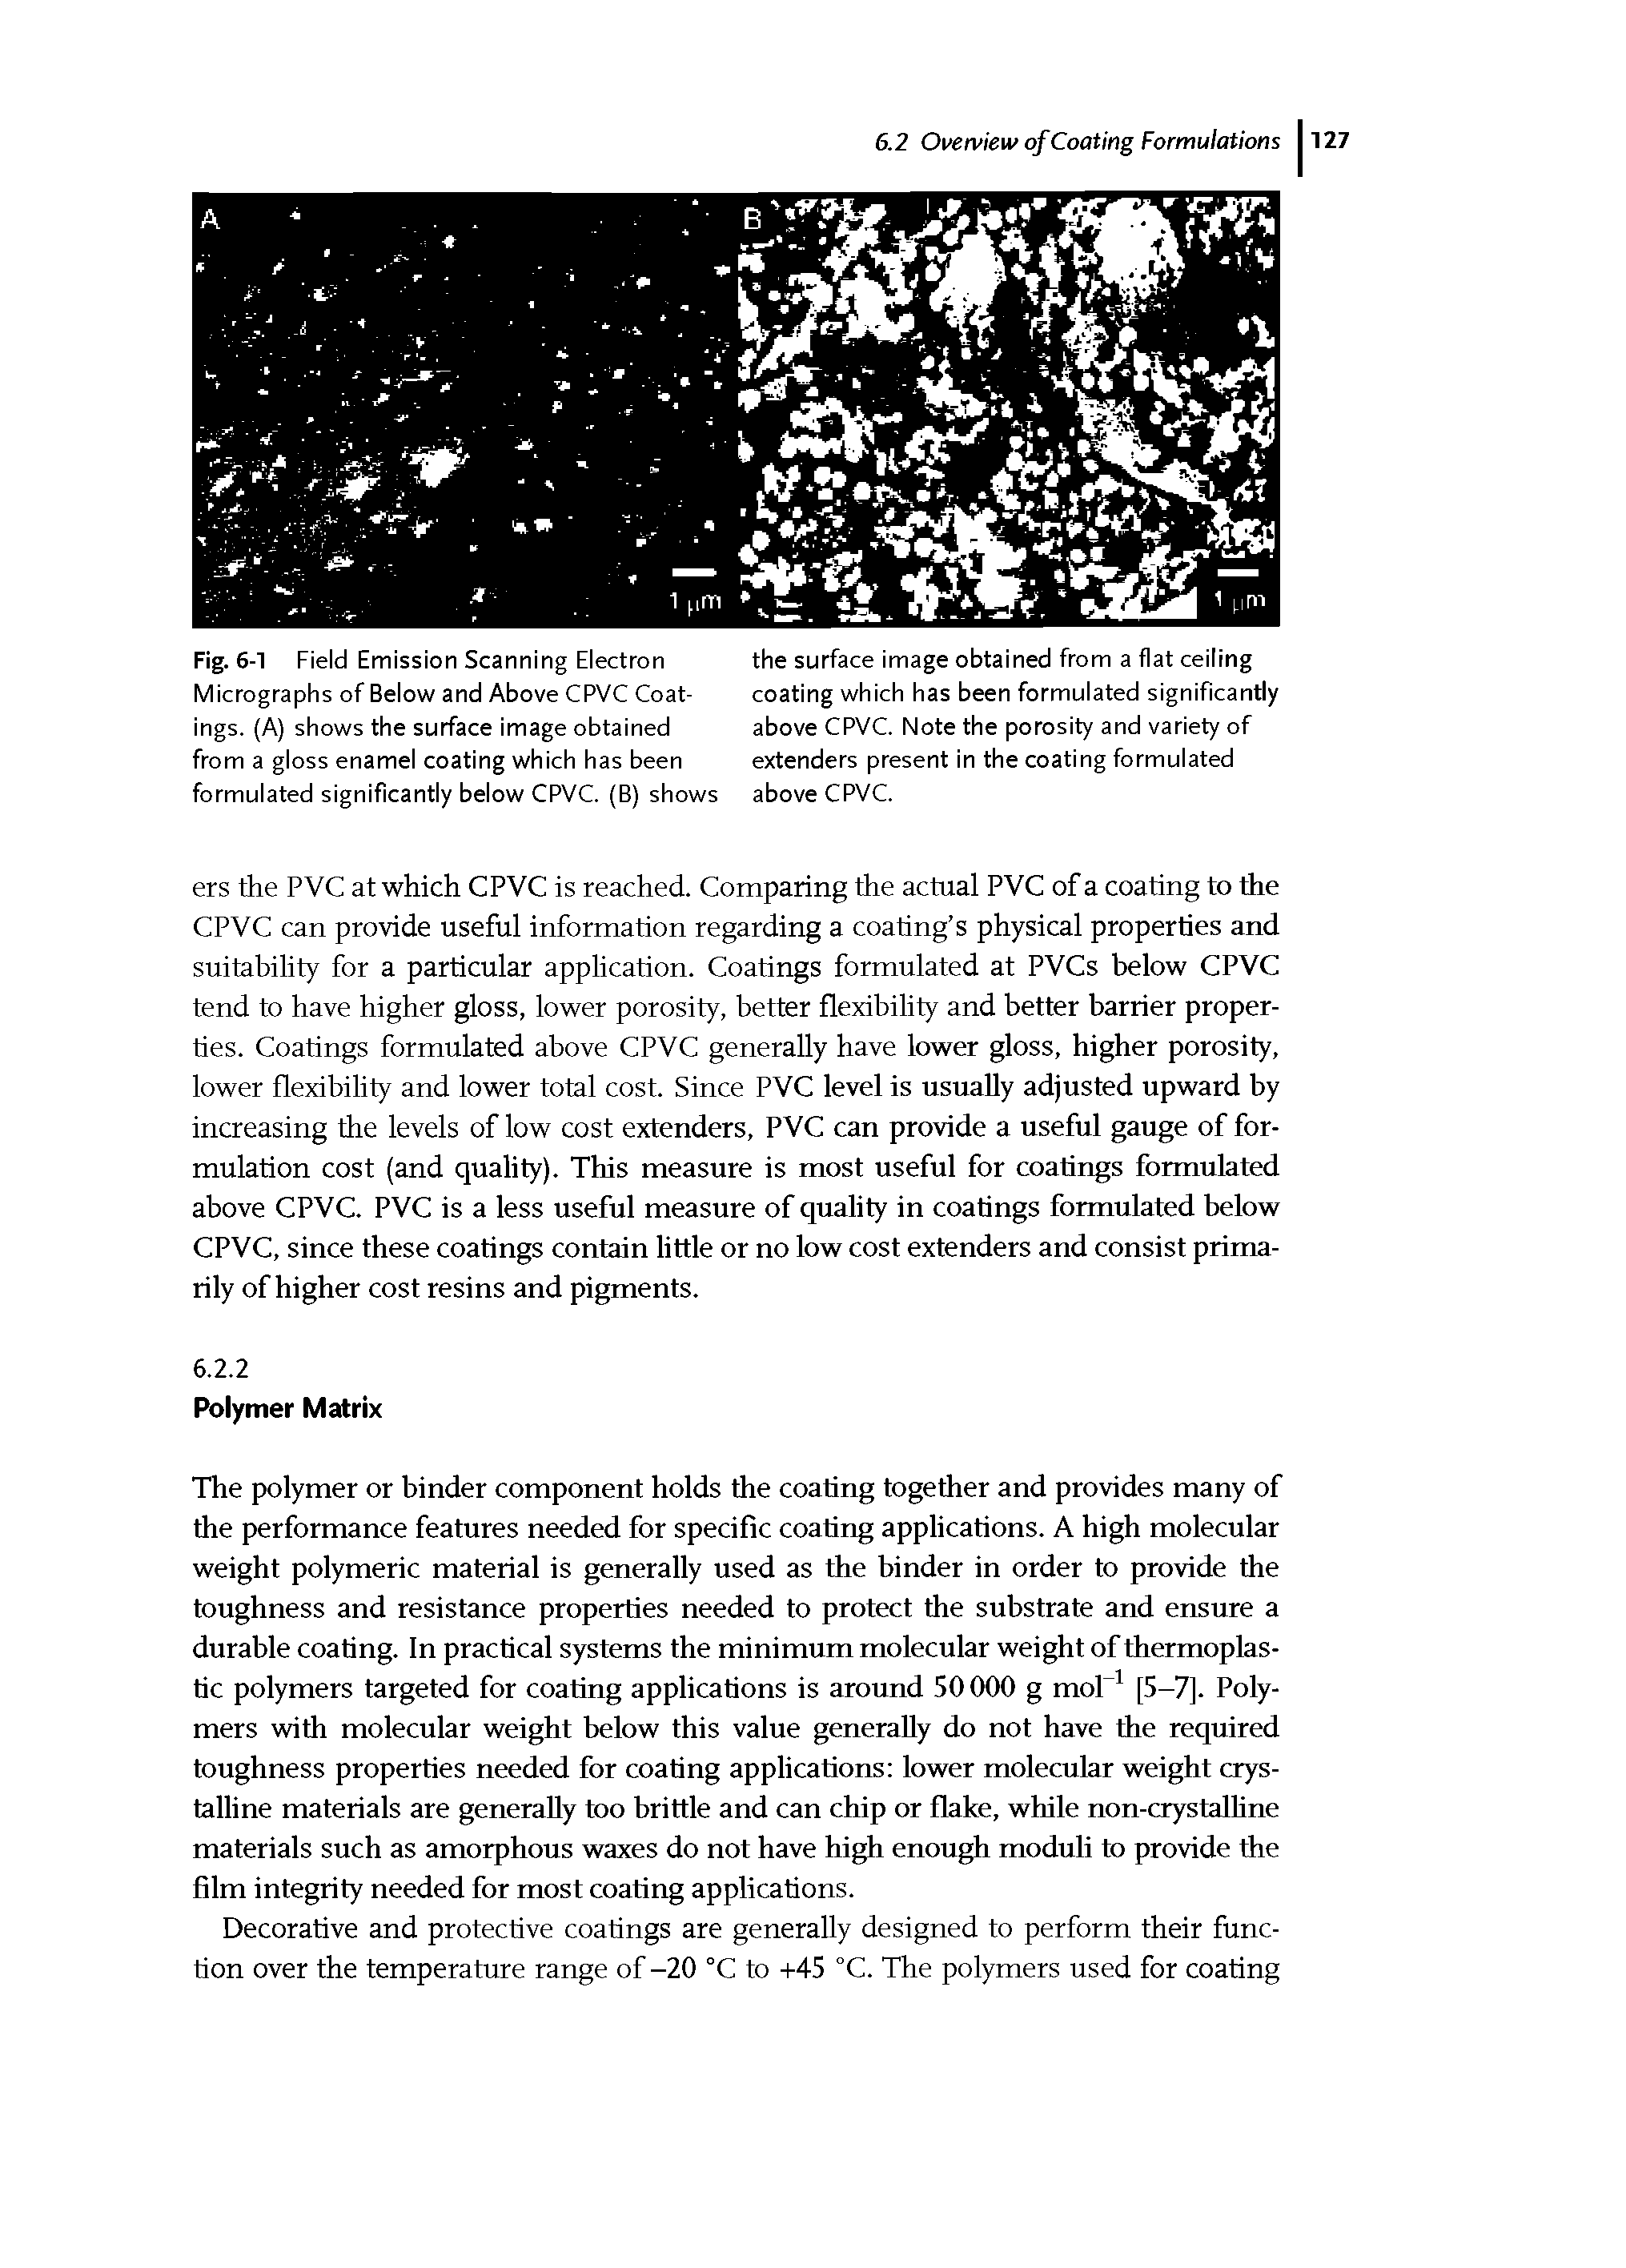 Fig. 6-1 Field Emission Scanning Electron Micrographs of Below and Above CPVC Coatings. (A) shows the surface image obtained from a gloss enamel coating which has been formulated significantly below CPVC. (B) shows...